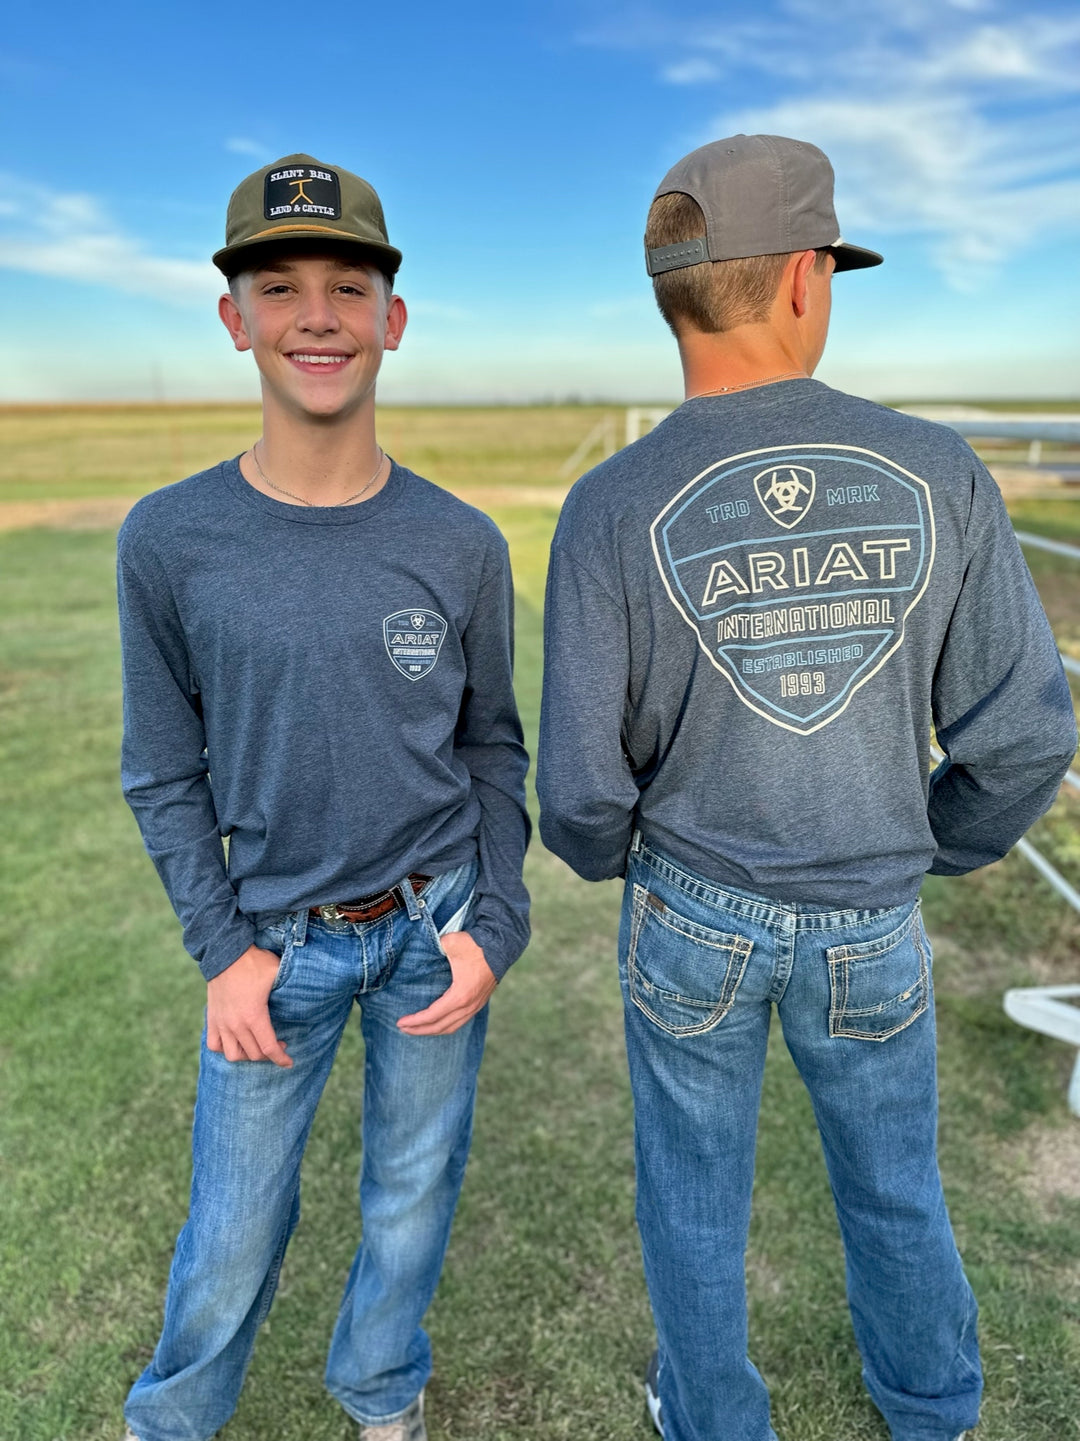 Ariat Crestline Longsleeve Graphic Tee by Ariat